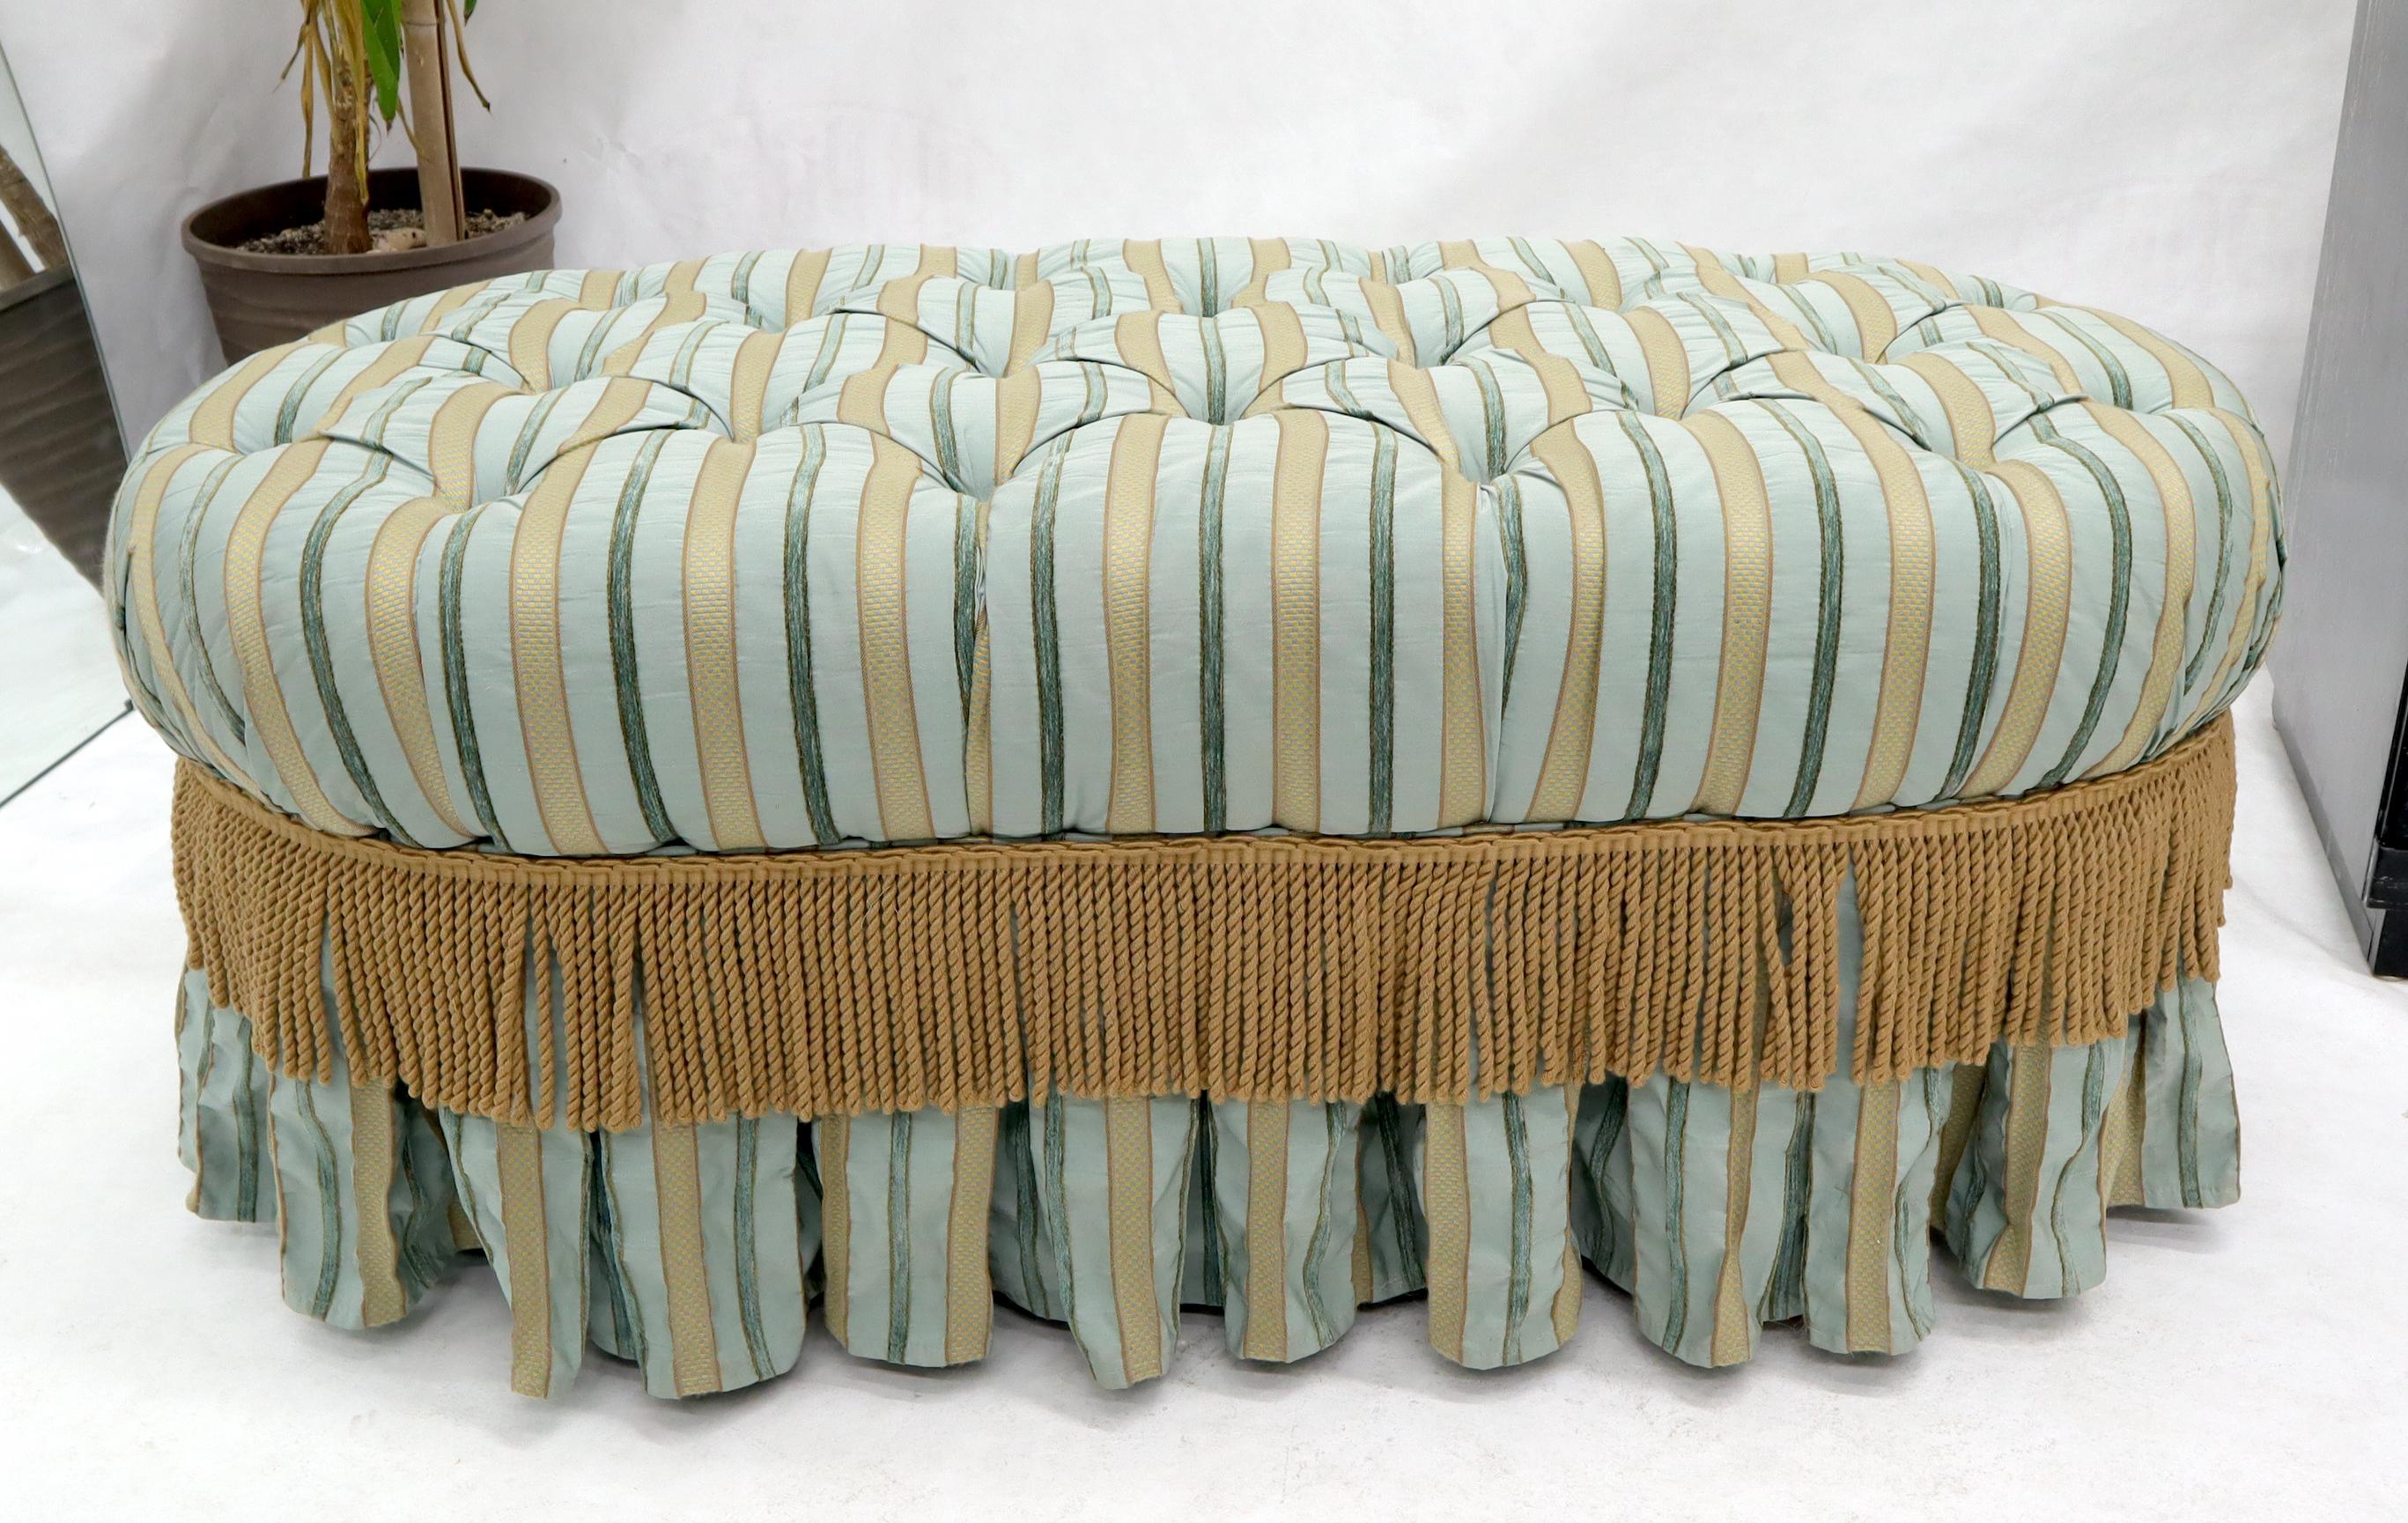 Decorative large tufted upholstery ottoman window bench.